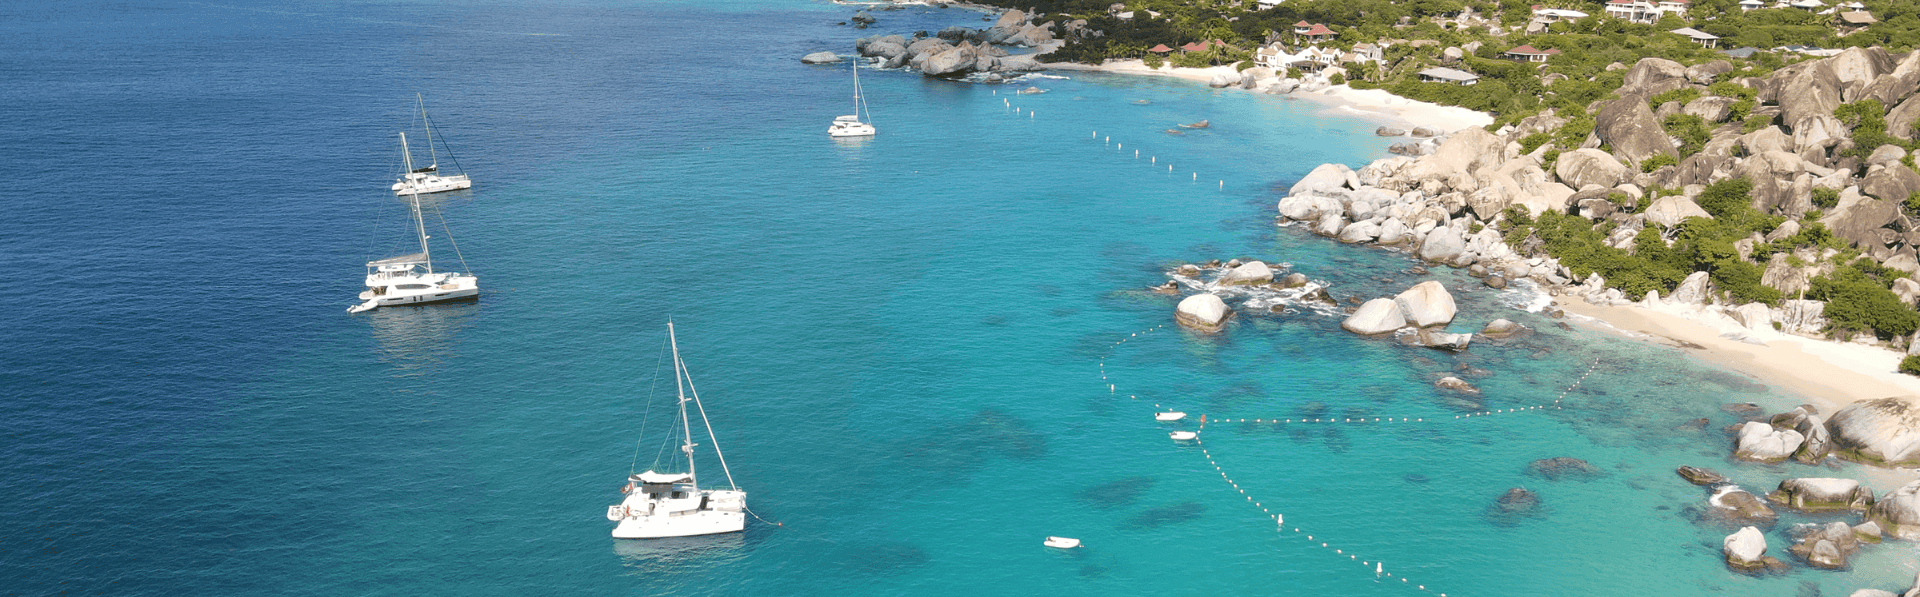 Yacht Charter Prices – All Inclusive vs Plus Expenses